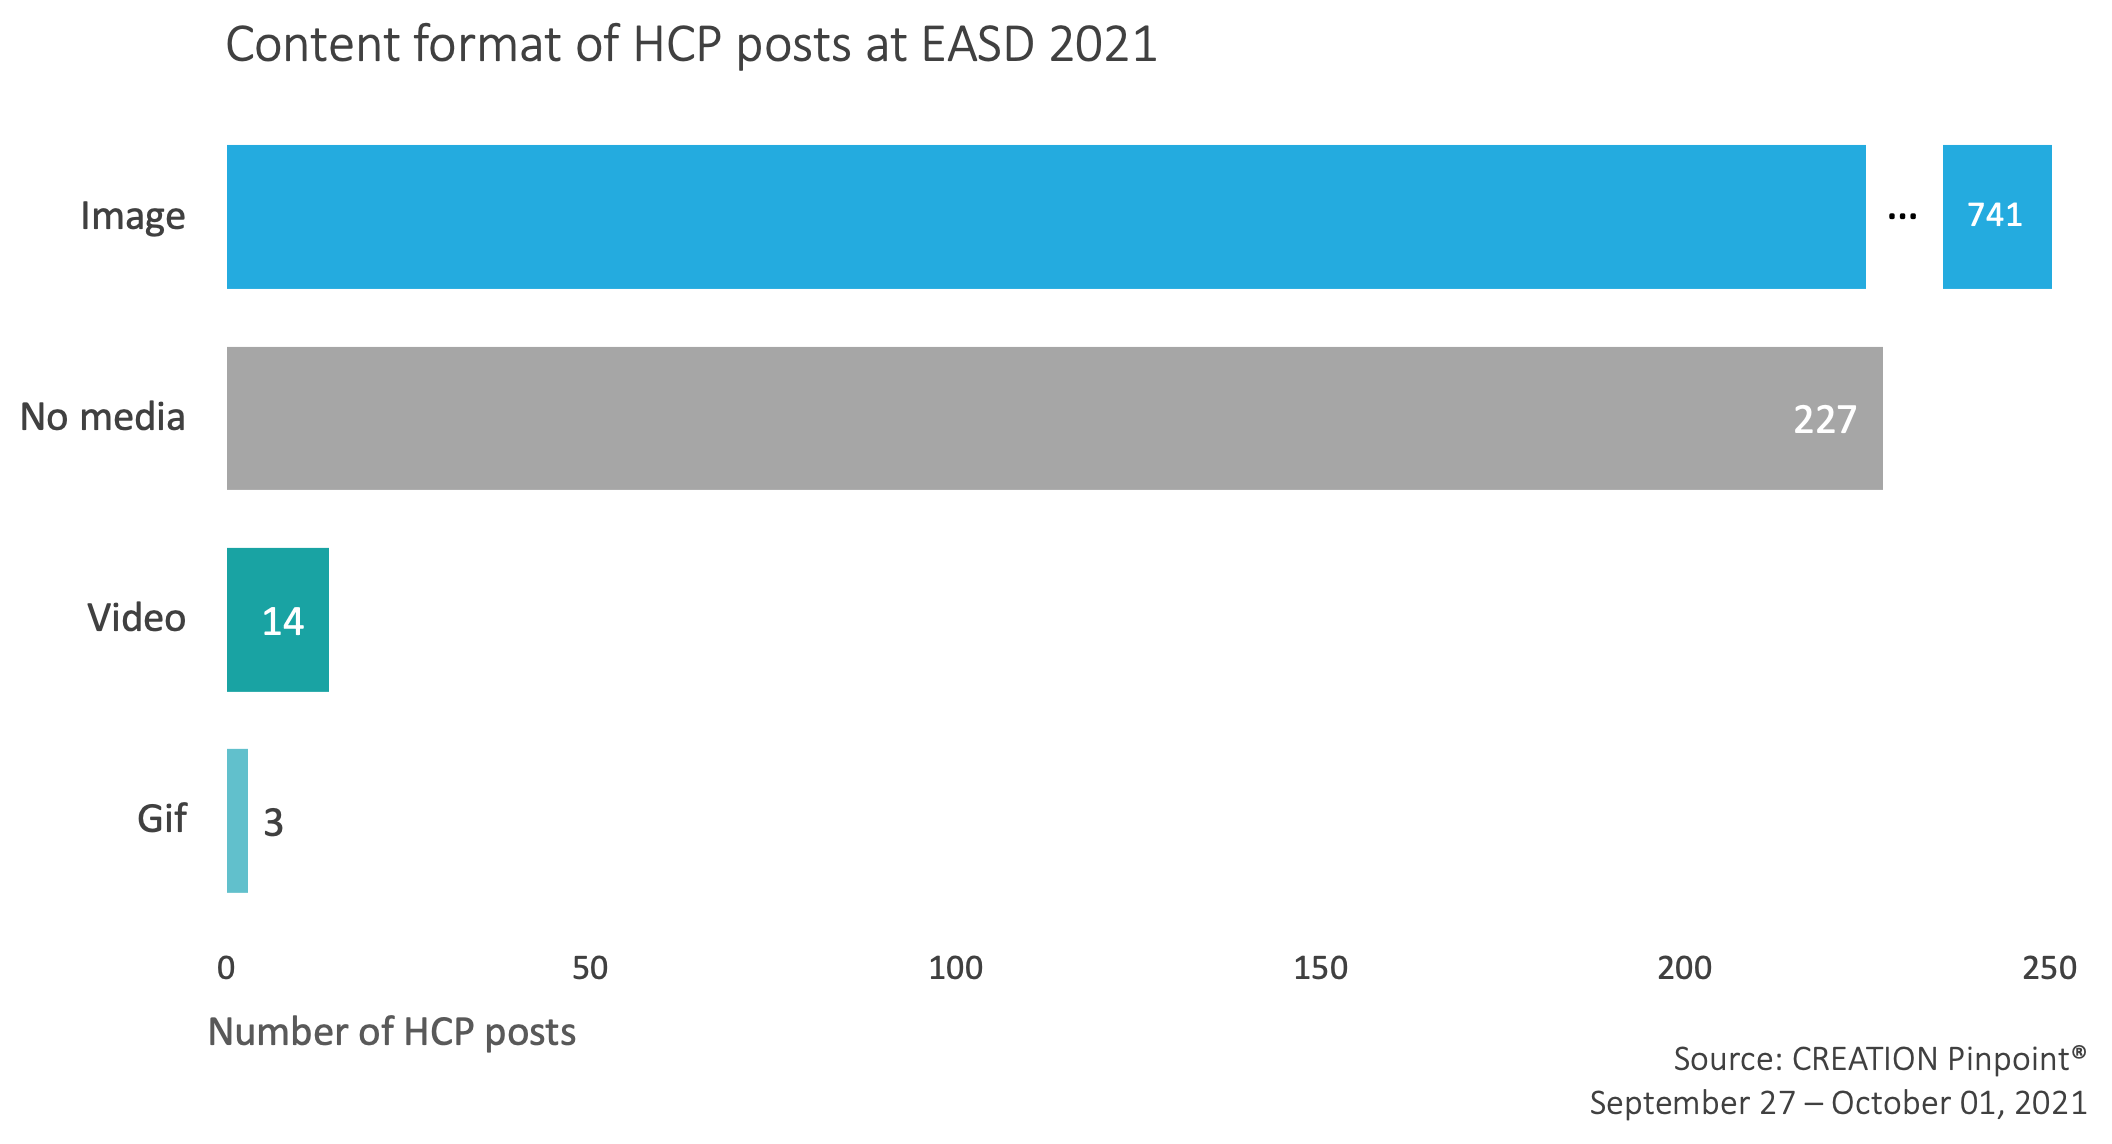 Graph showing Content format of HCP posts during EASD 2021